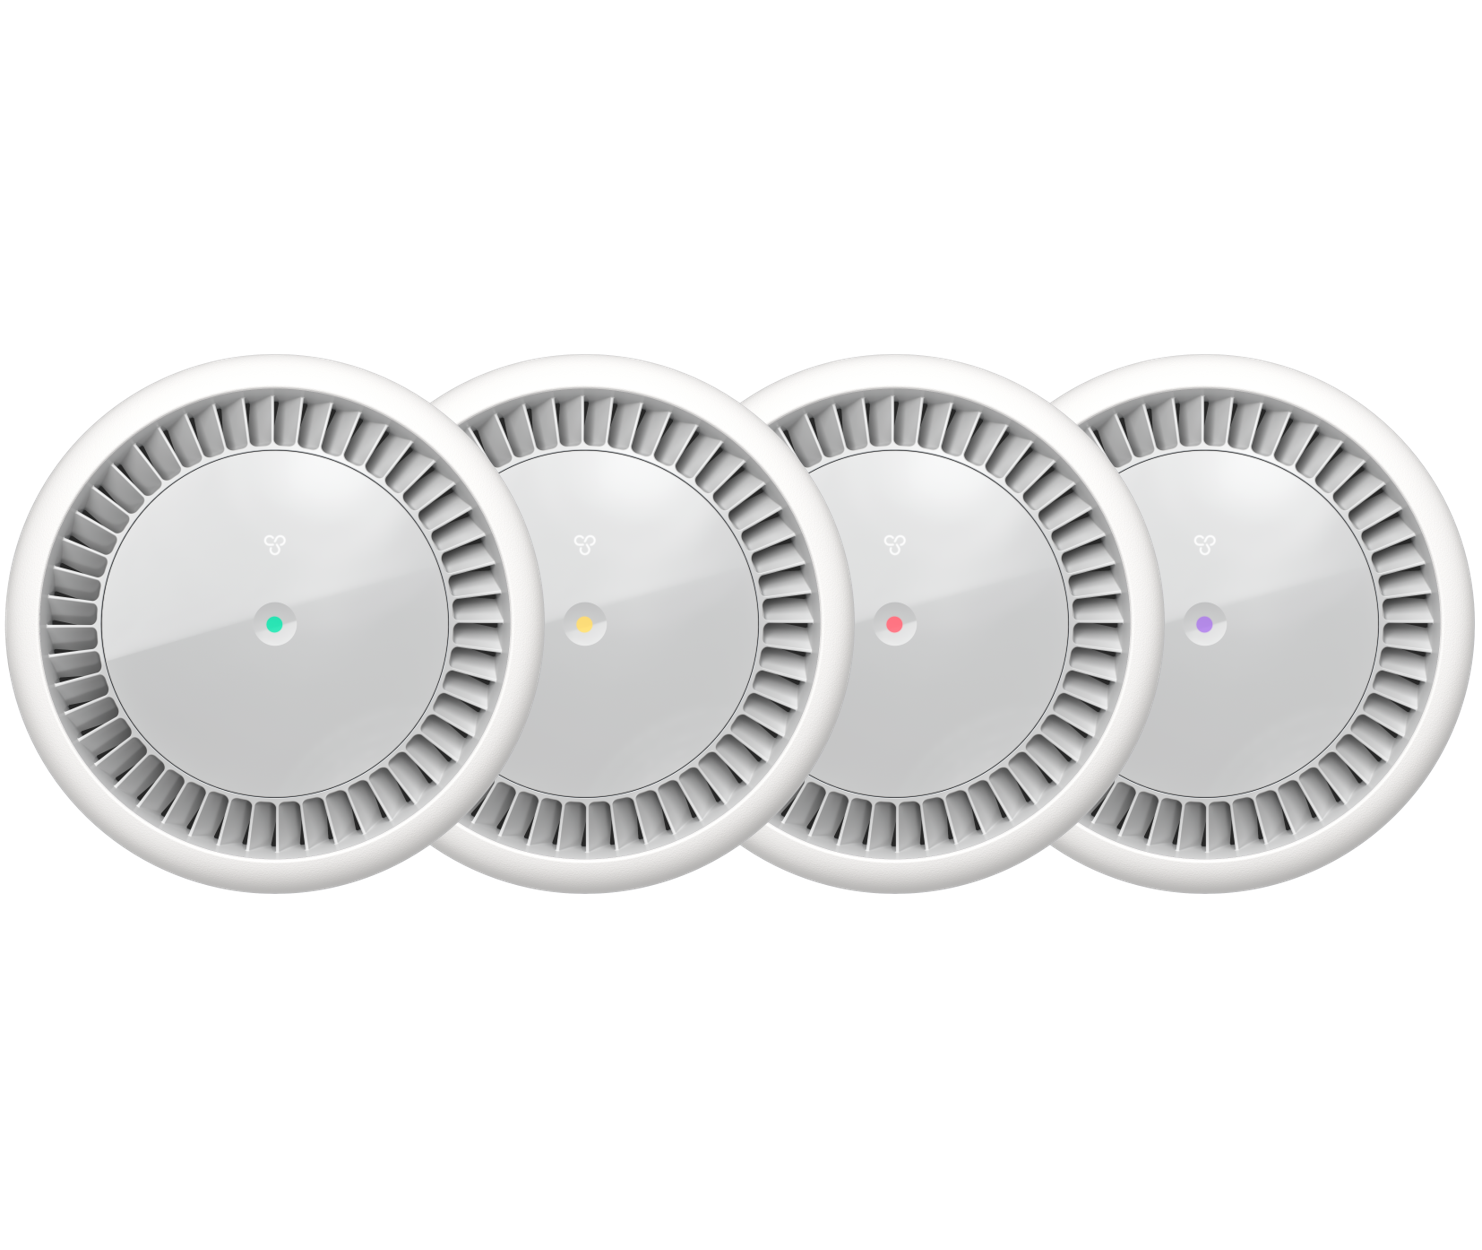 Top-down view of four Molekule air purifiers with colored indicator lights